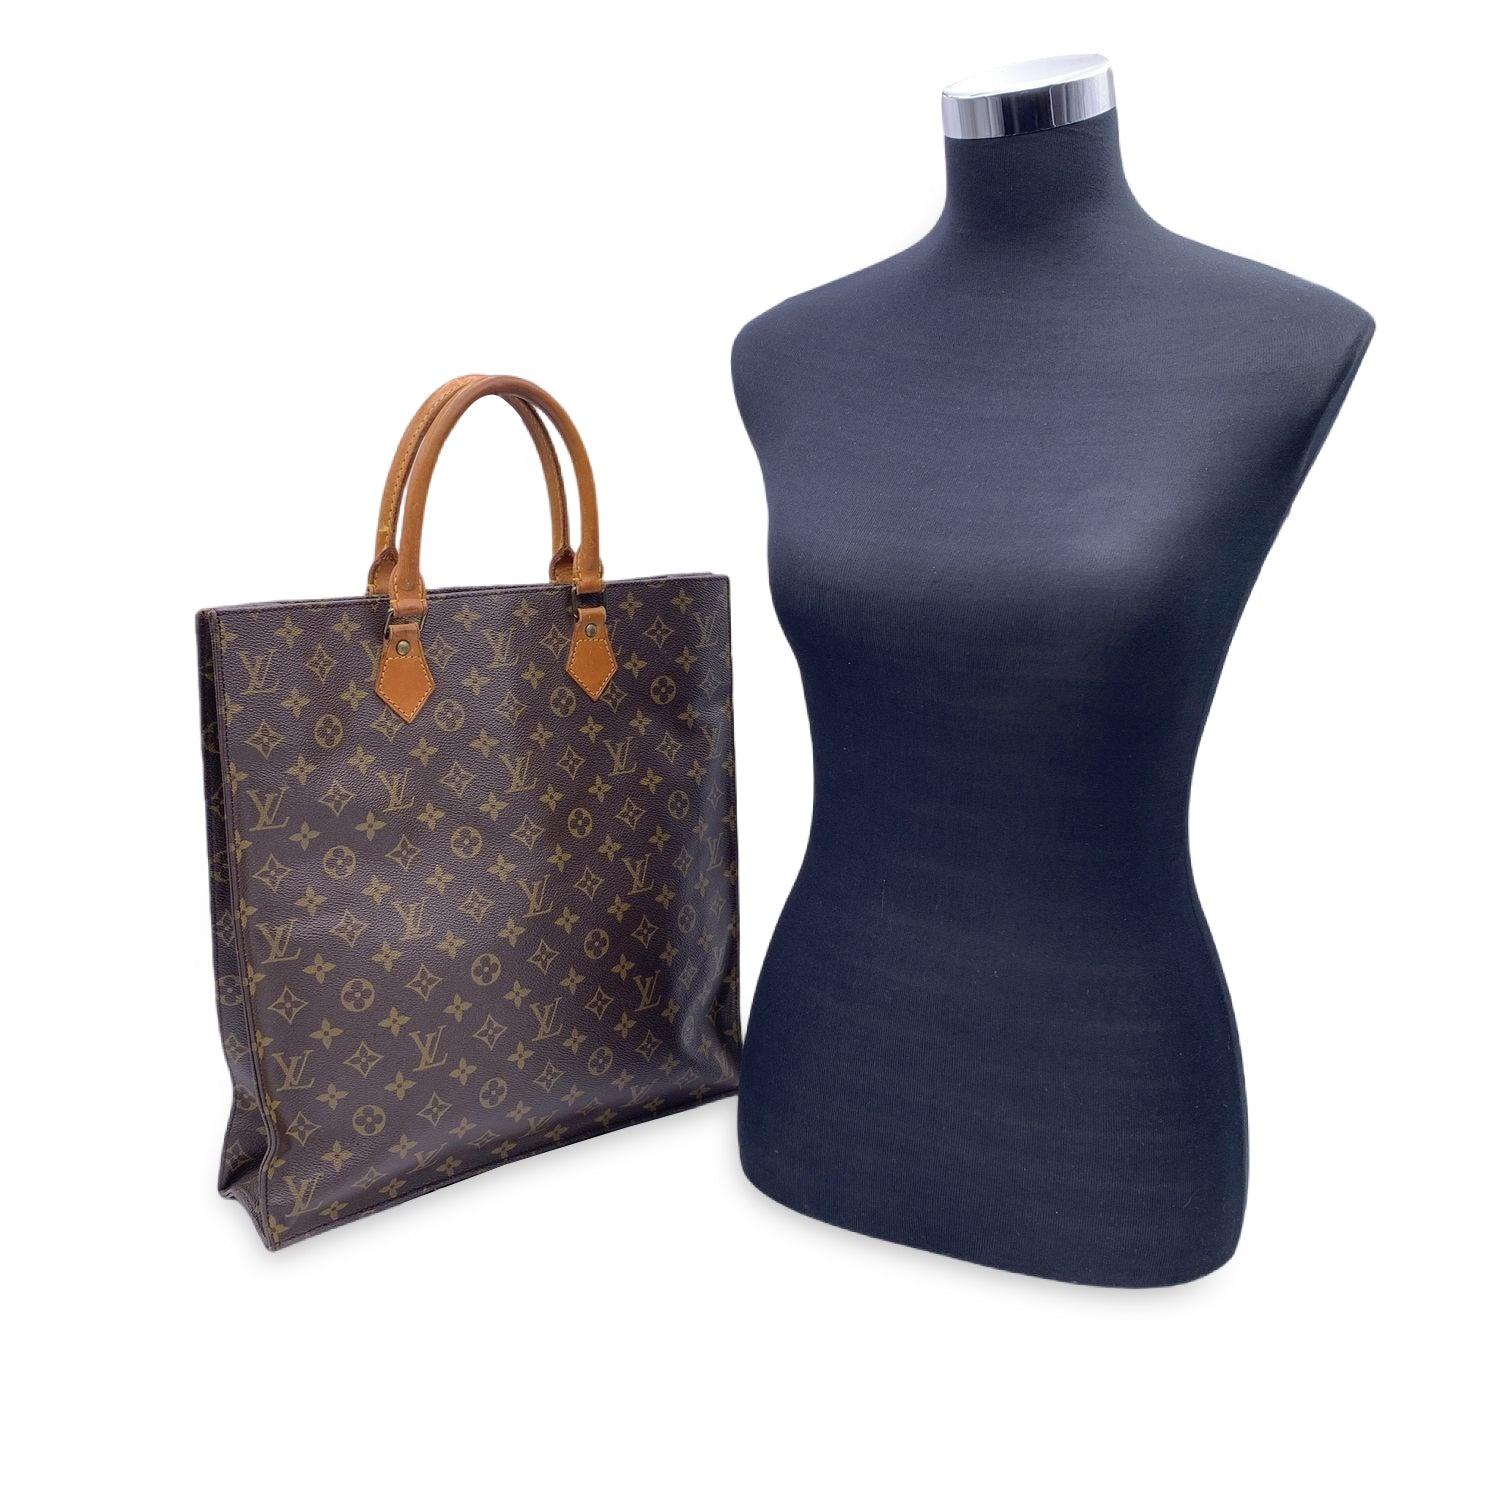 Vintage LOUIS VUITTON 'Sac Plat' tote bag in timeless monogram canvas. Rectangular box shape and open top. Double rounded leather top handles. Canvas lining. 'LOUIS VUITTON - Made in France' tag inside. Data code inside the interior pocket.